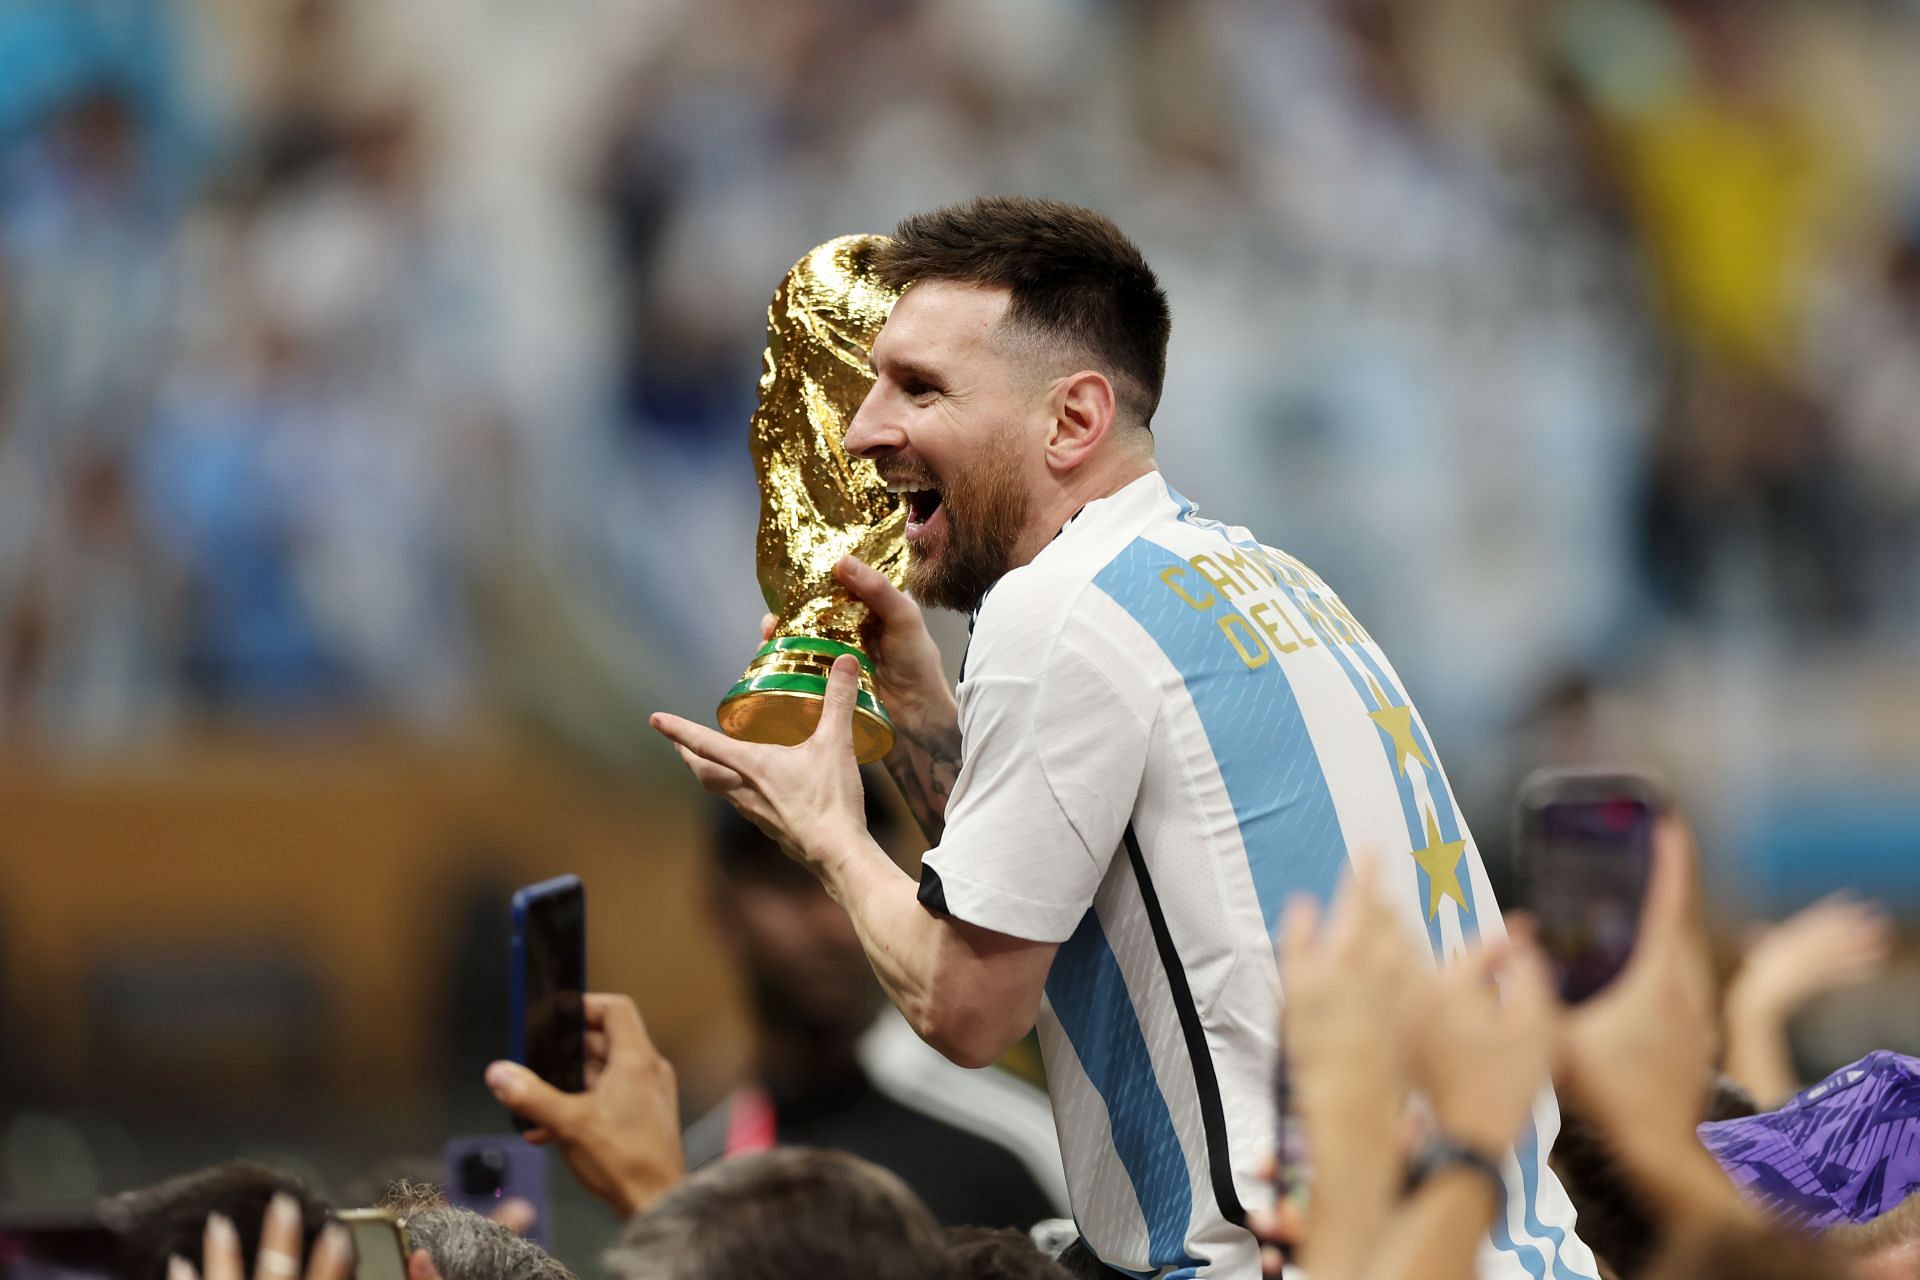 Lionel Messi finally got his hands on a long-awaited World Cup trophy.